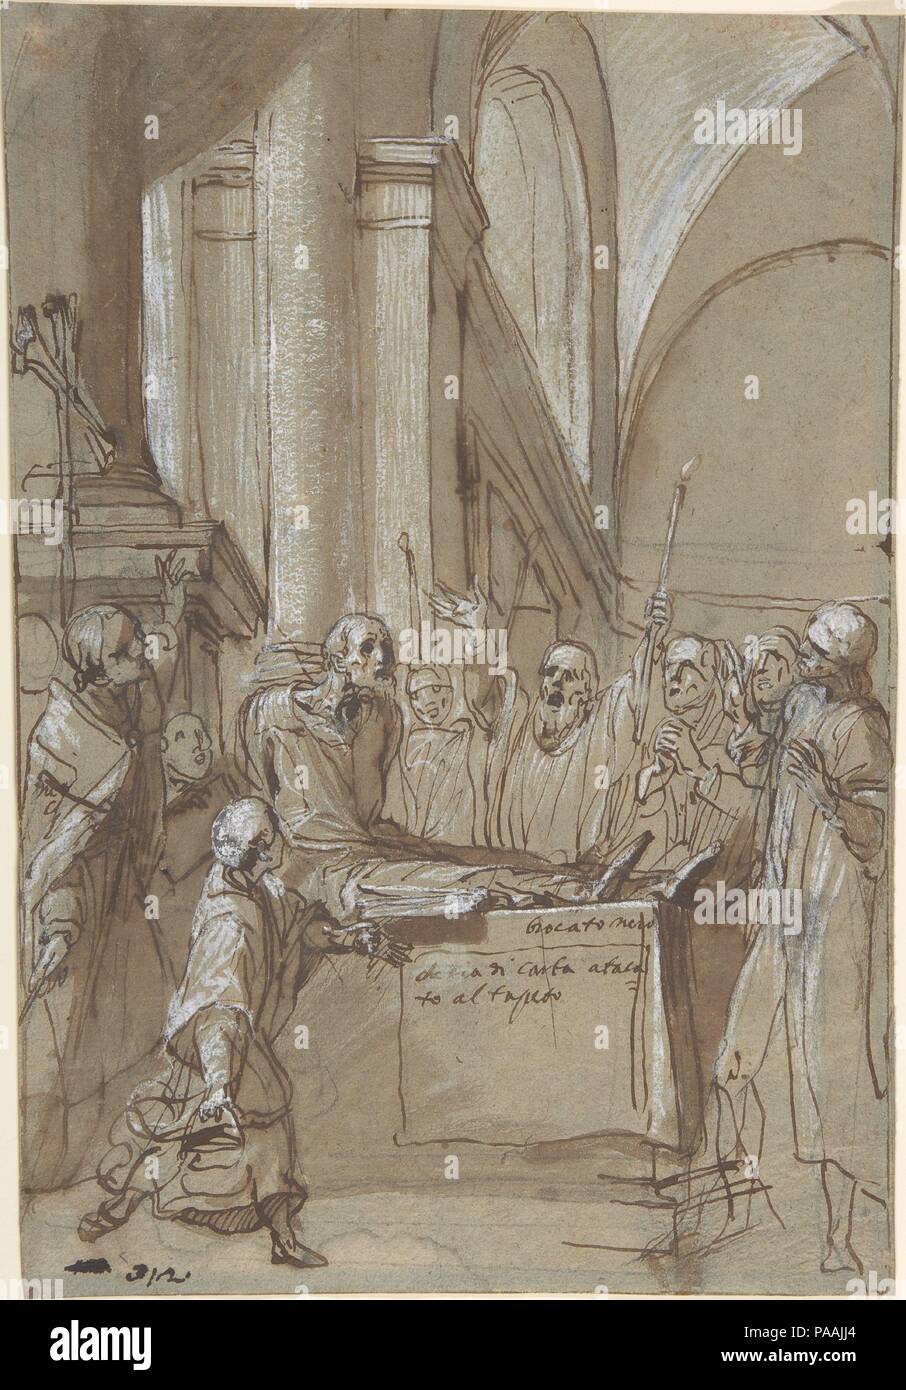 Raymond Diocrès Speaking During His Funeral (from the Life of Saint Bruno of Cologne). Artist: Daniele Crespi (Italian, Busto Arsizio 1597/1600-1630 Milan). Dimensions: 12 3/16 x 8 1/4 in.  (31 x 21 cm). Date: 1628-29.  Daniele Crespi, who lived to be barely thirty-three years old and who nevertheless is counted among the leading Italian Baroque painters, hailed from the region of Lombardy.  He was active mainly in Milan.  His artistic vocabulary seems dazzling for its energy of figural pose, expressive gesture, and dramatic light. This virtuoso drawing relates to a very well known project of  Stock Photo